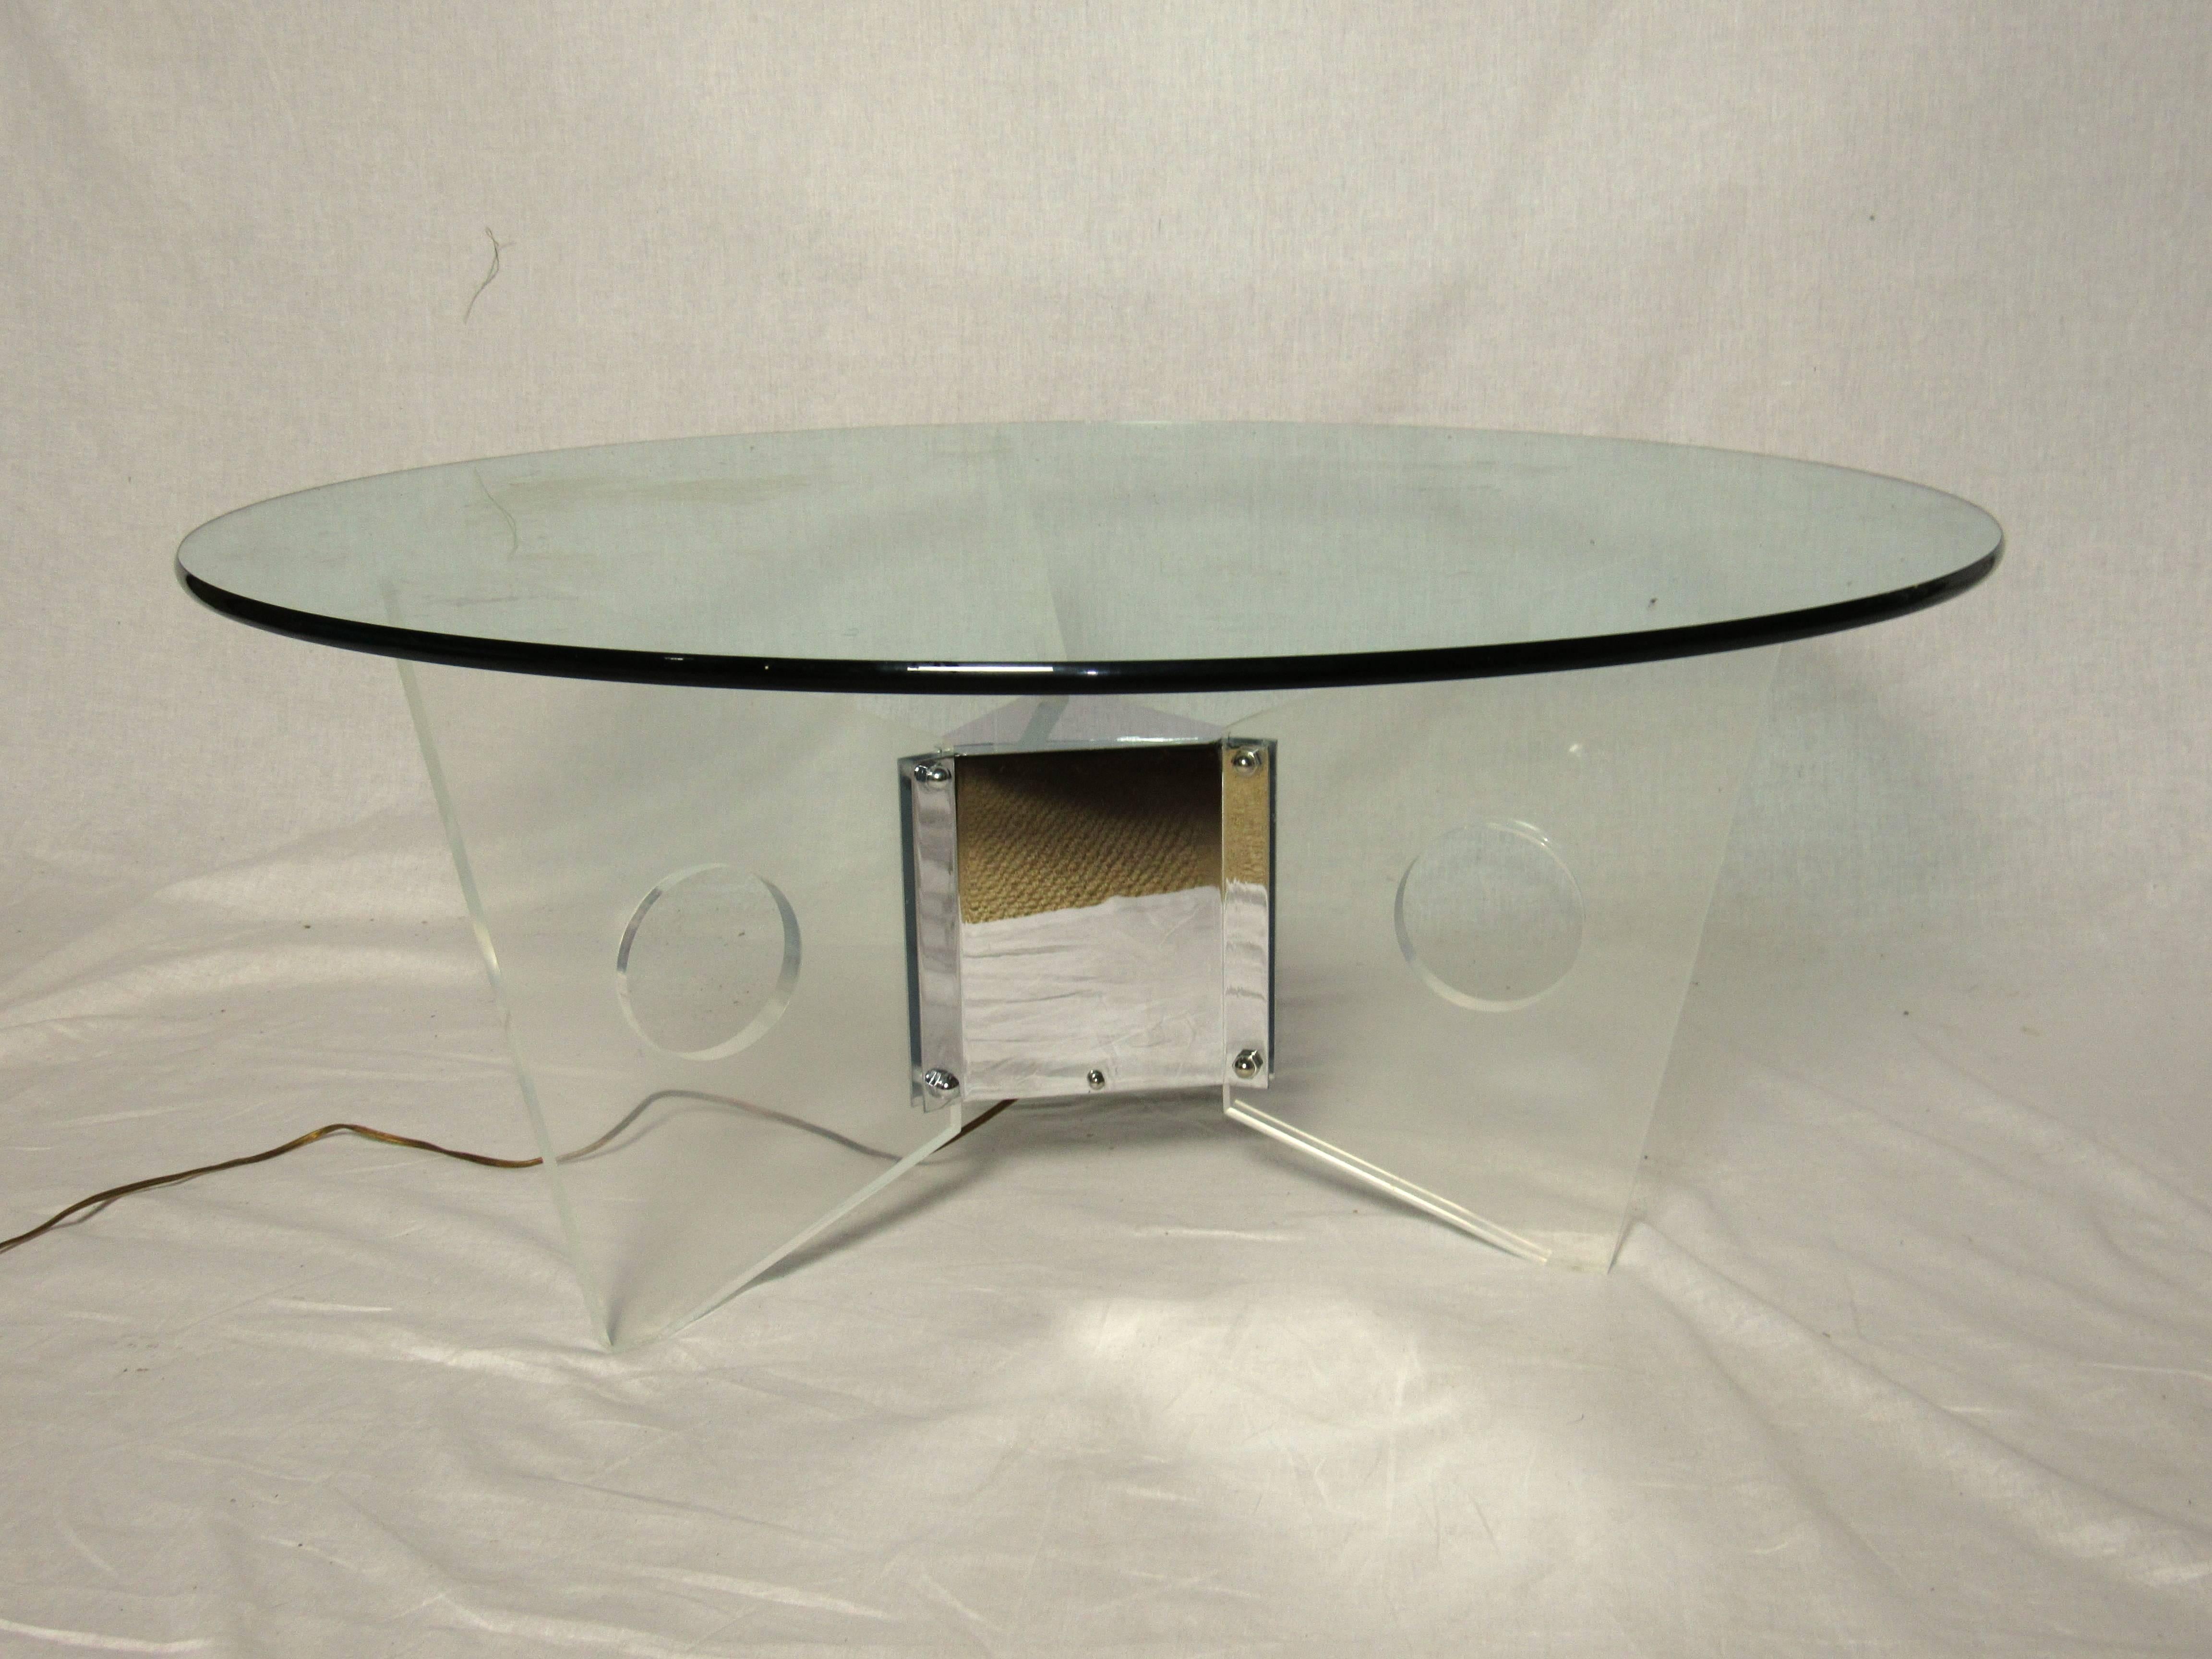 Wonderful light up coffee table which can be lit by any color bulb or just a clear bulb to accentuate the Lucite fins.
Very cool, Studio 54, bright lights, Big City, Miami Vice.
The table is in excellent condition.